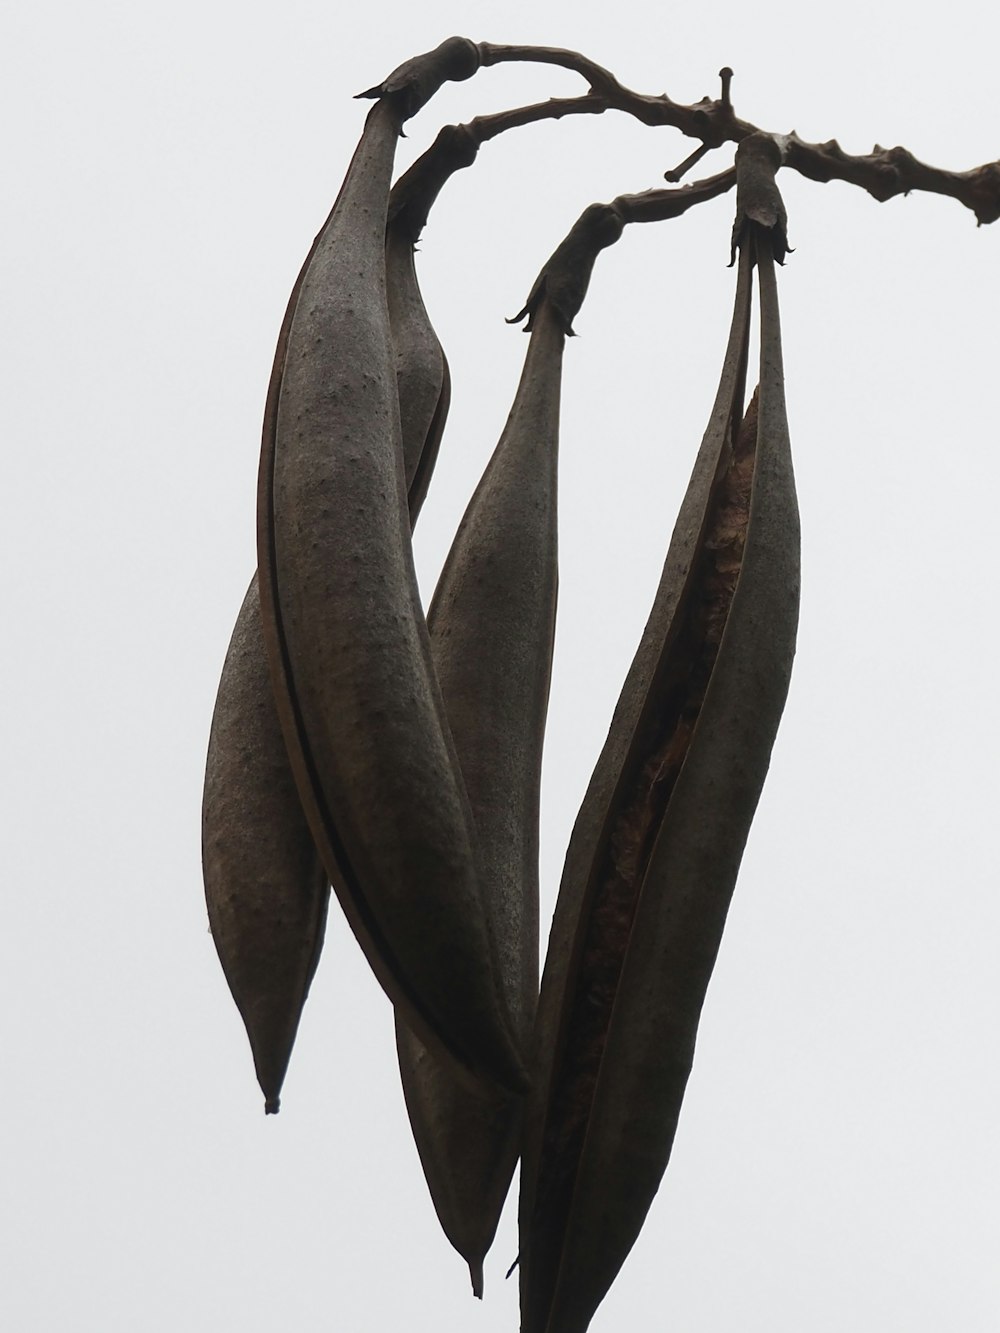 a close up of a seed on a tree branch